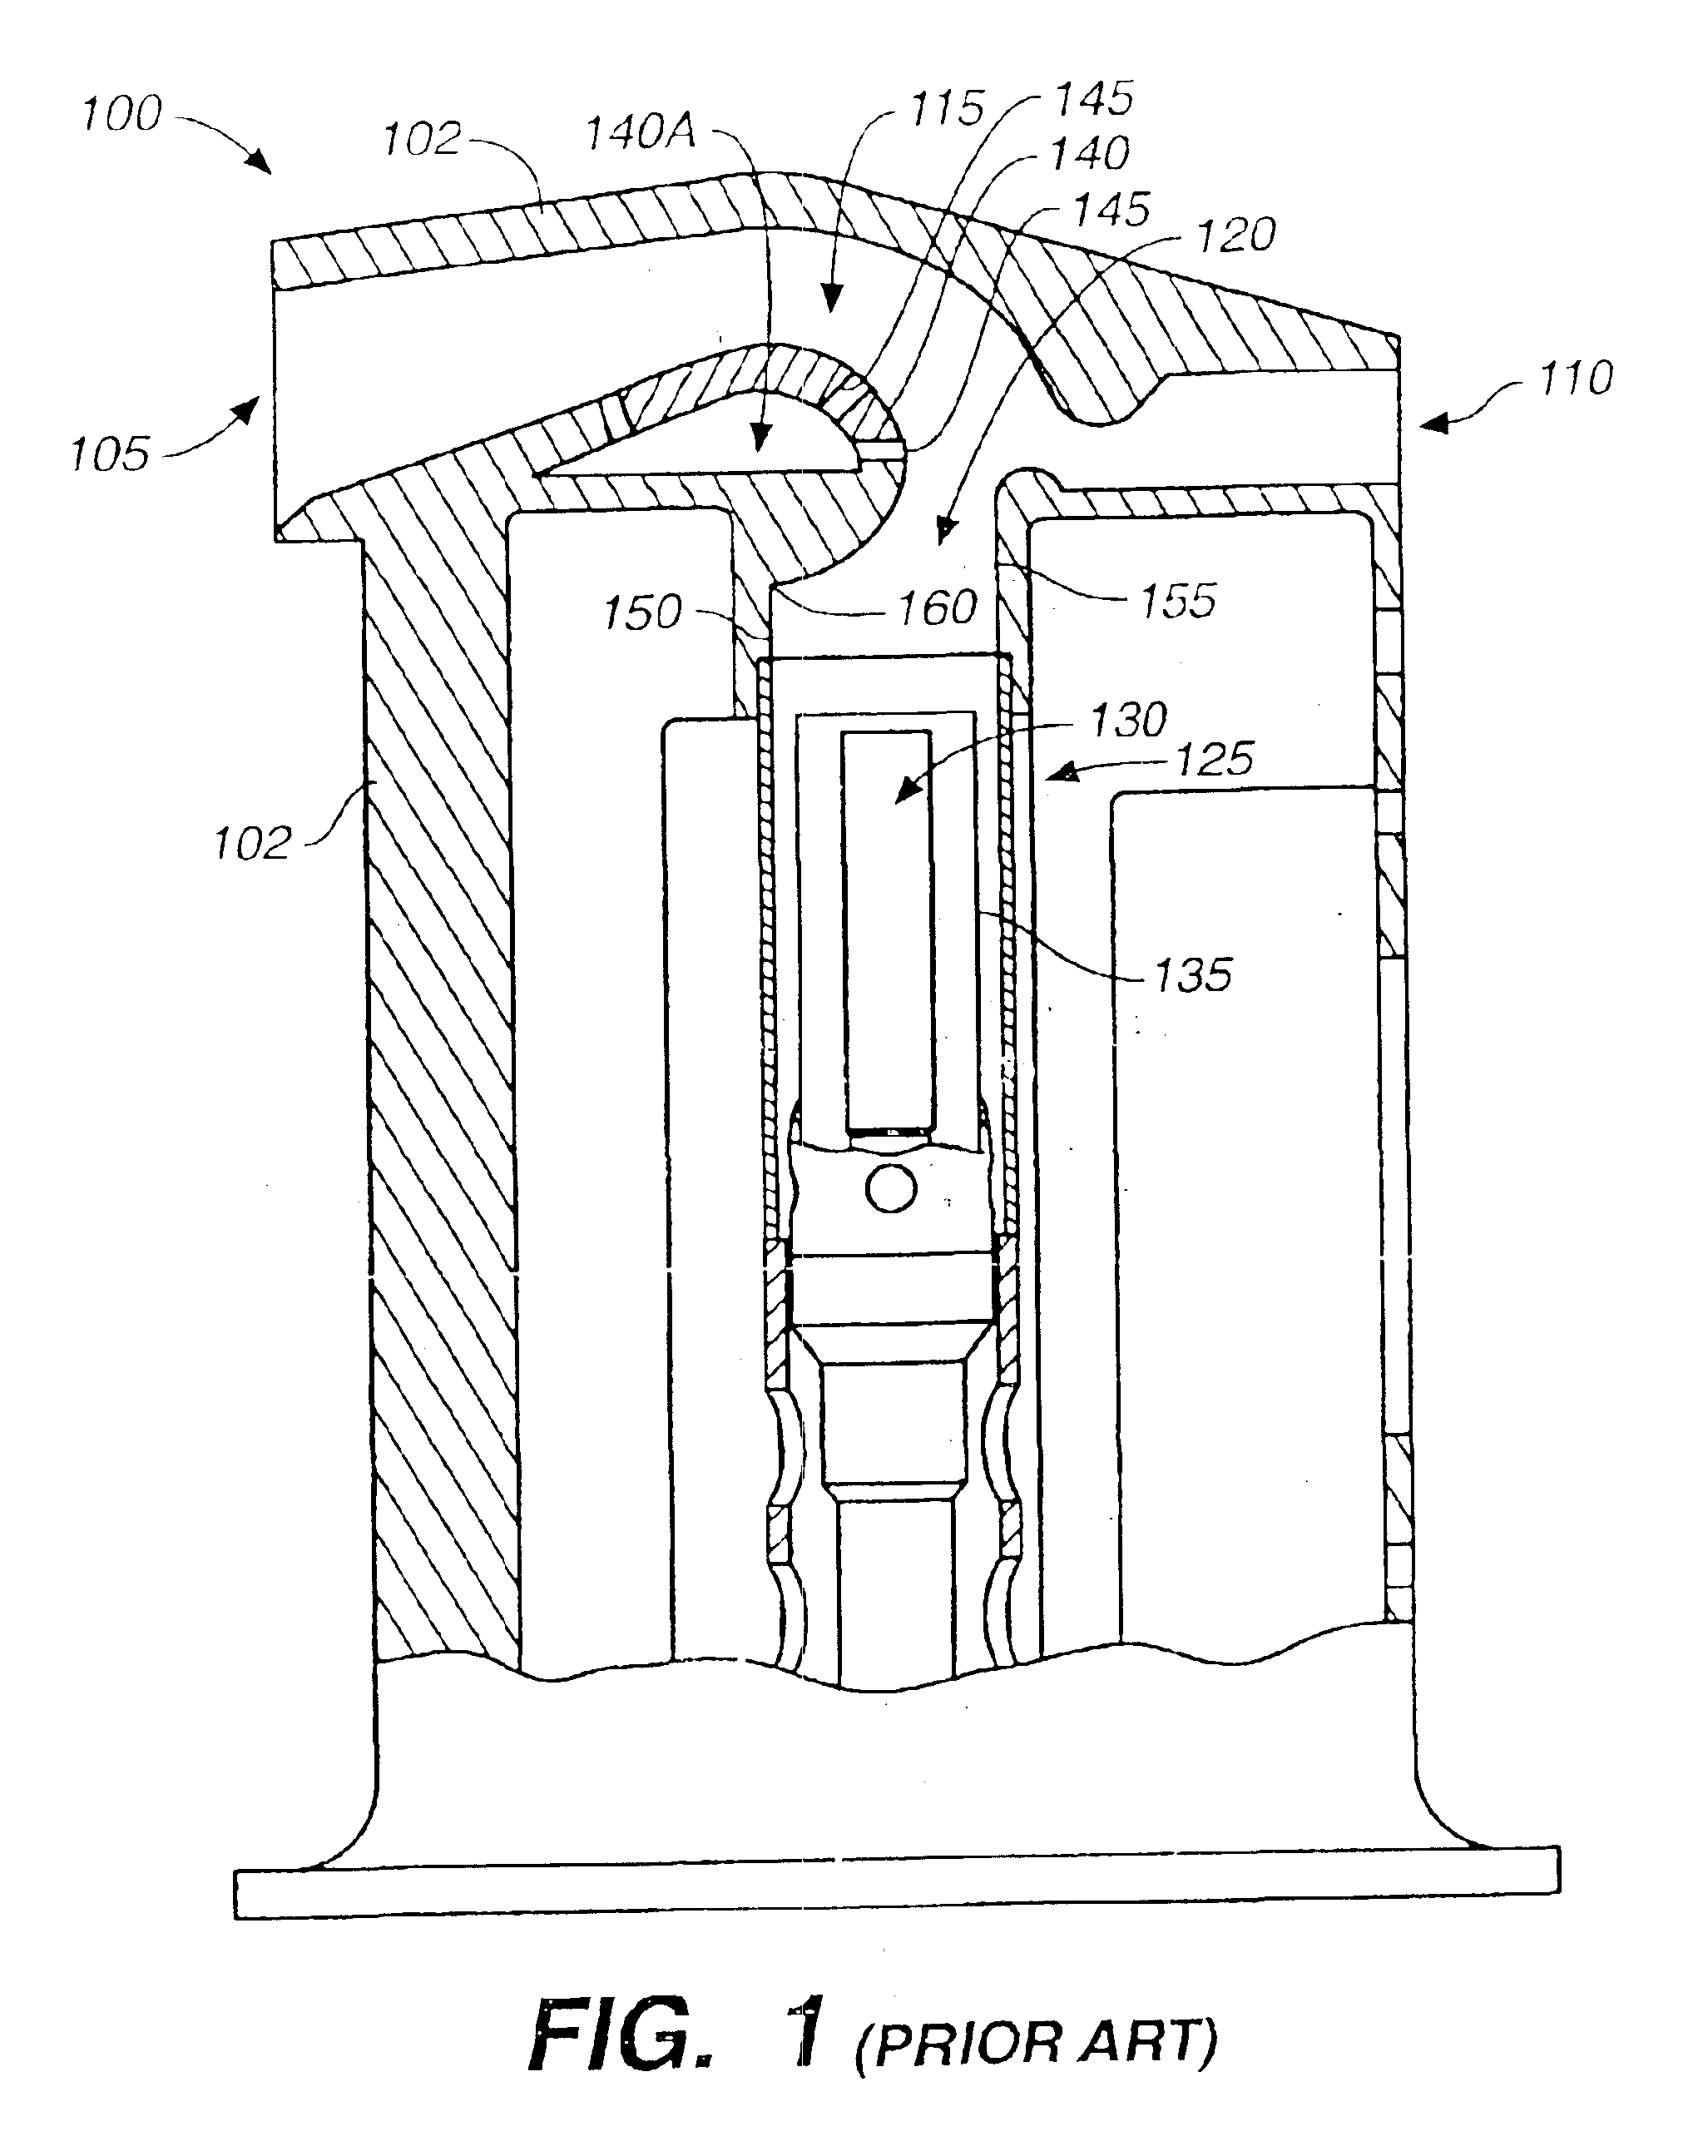 Total air temperature probe providing improved anti-icing performance and reduced deicing heater error